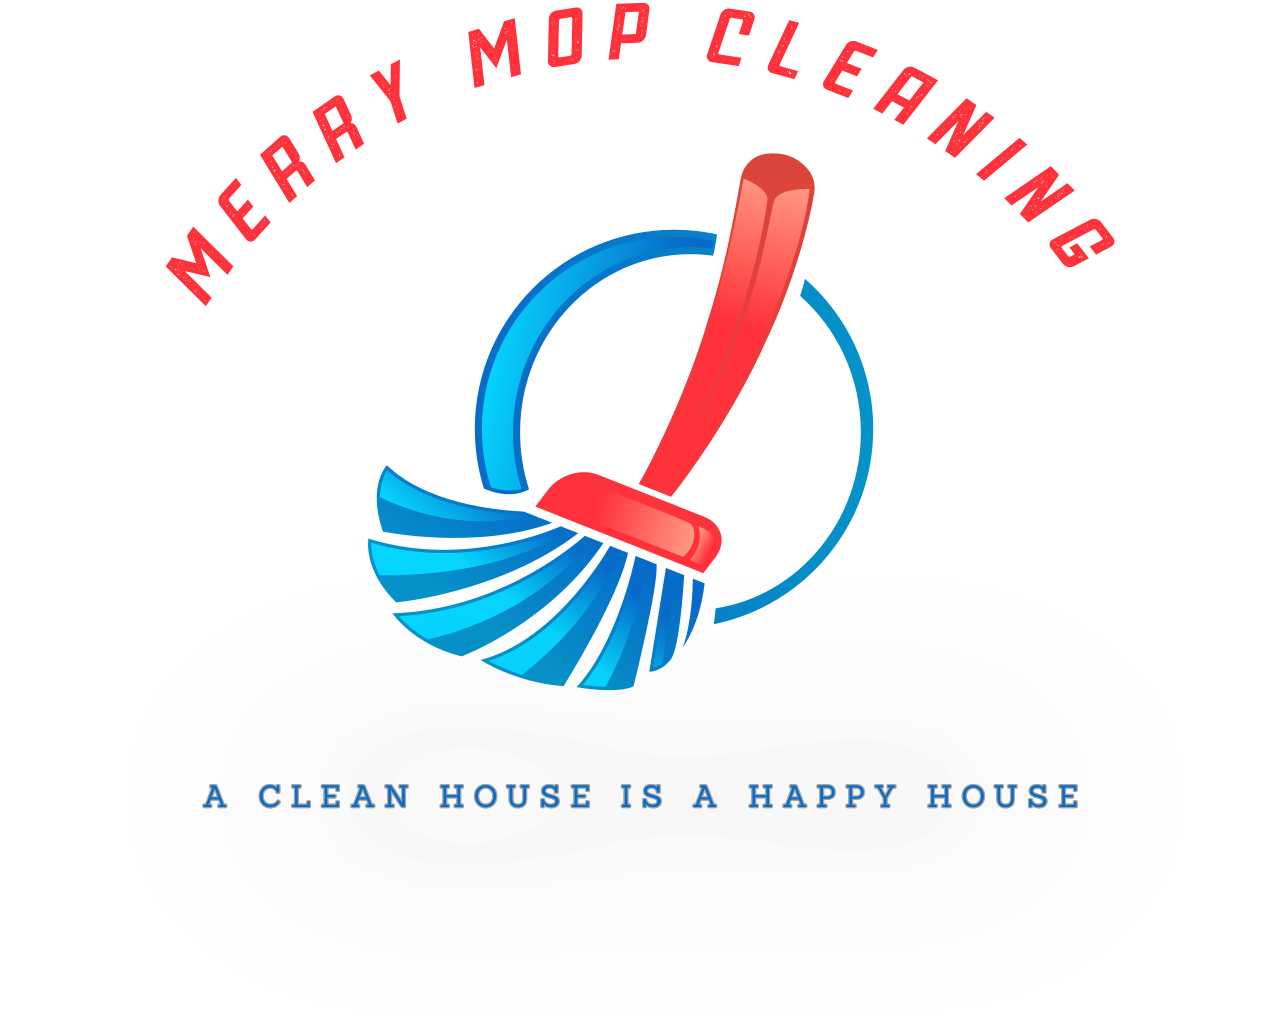 Merry Mop Cleaning Services's logo